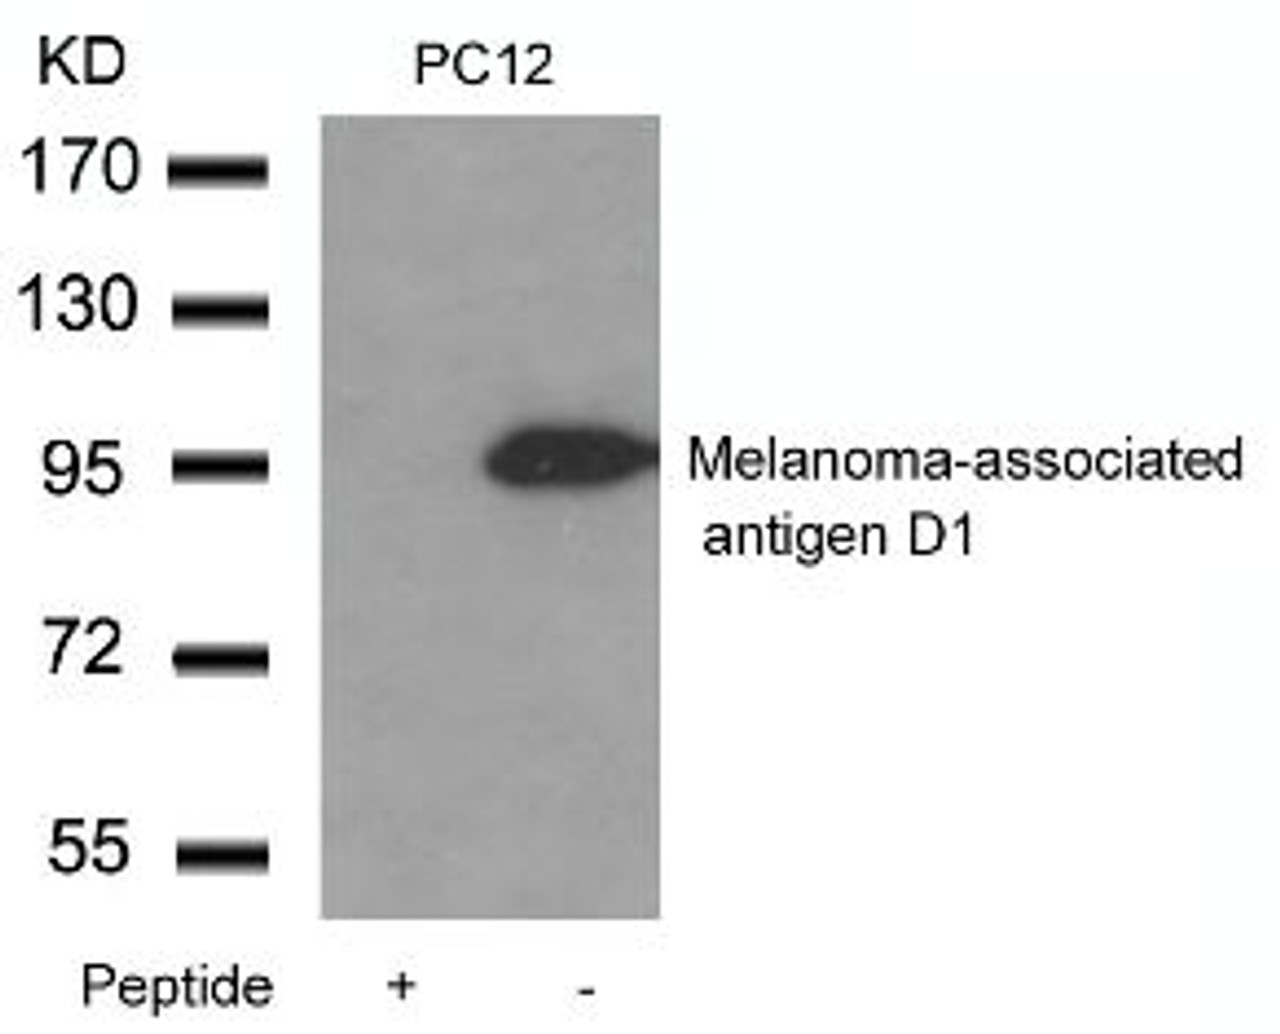 Western blot analysis of lysed extracts from PC12 cells using Melanoma-associated antigen D1 Antibody.